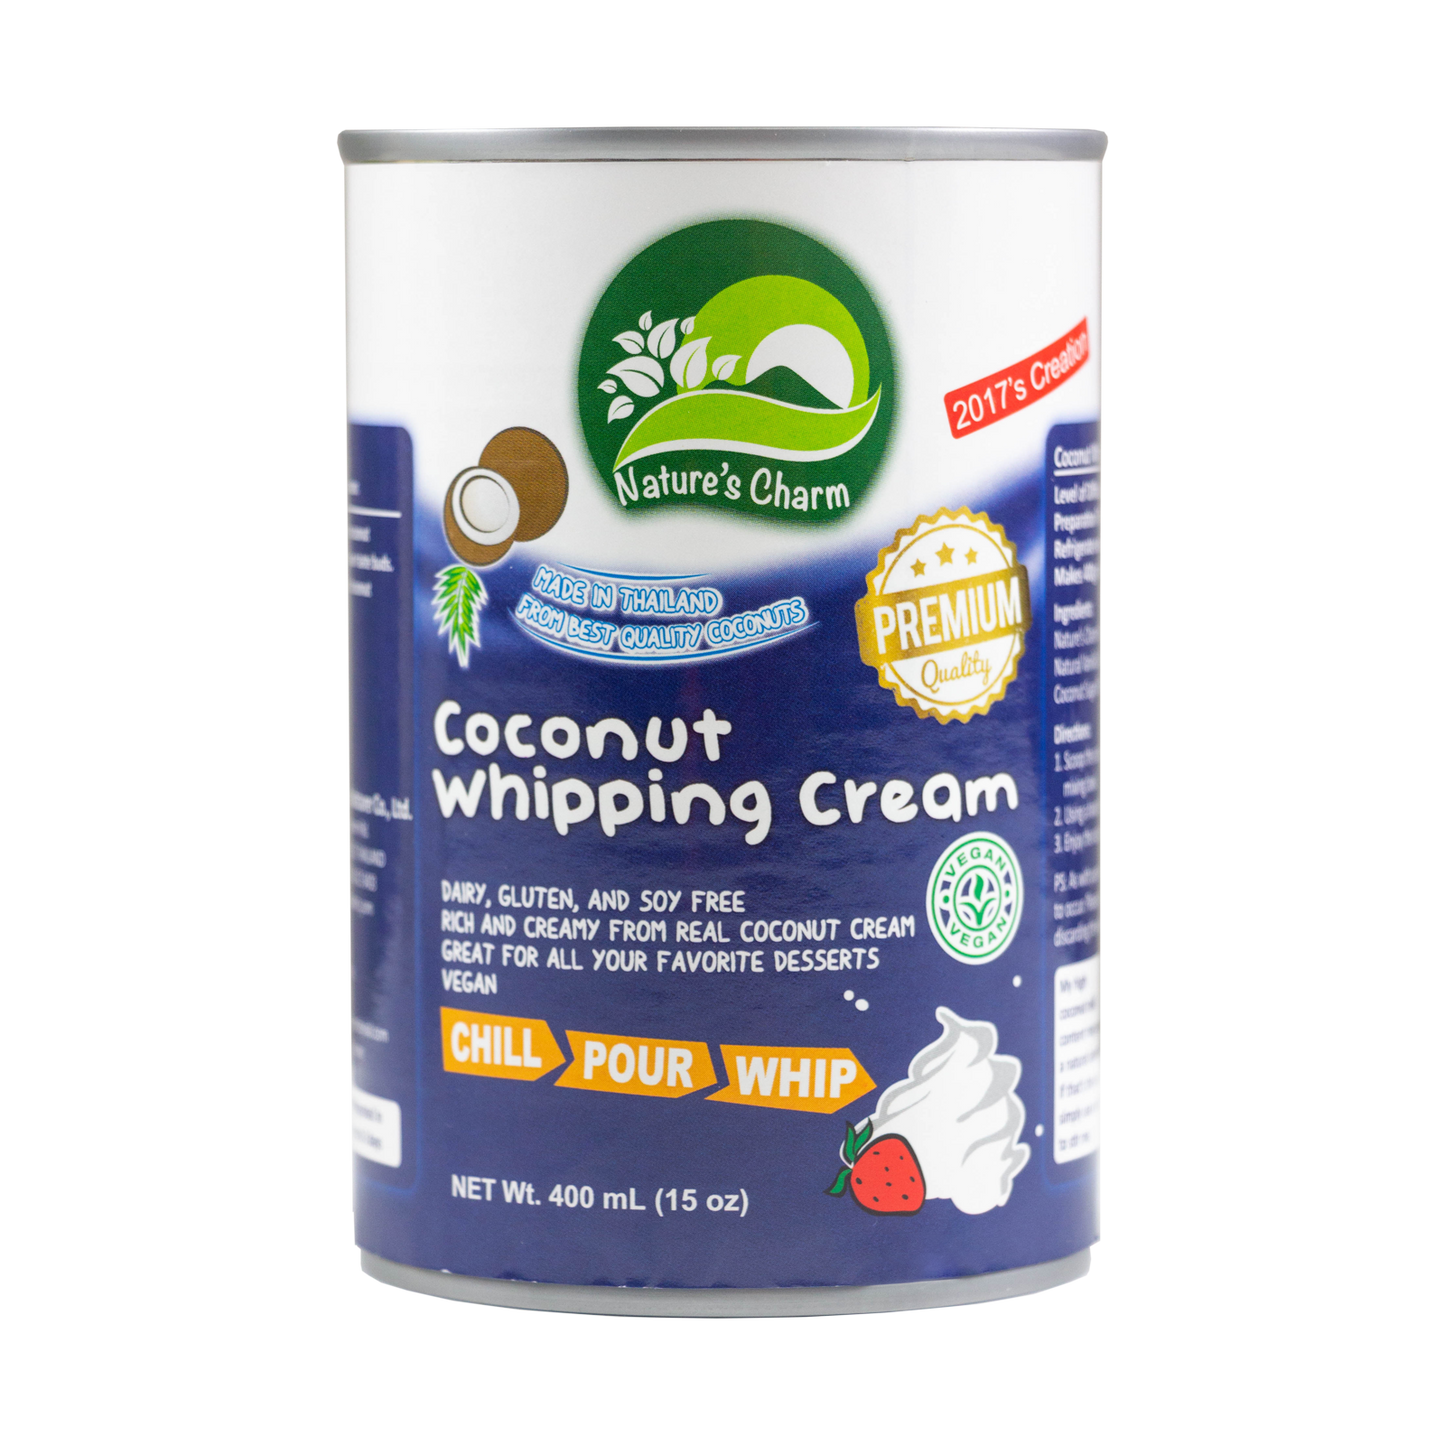 Nature's Charm - Coconut Whipping Cream